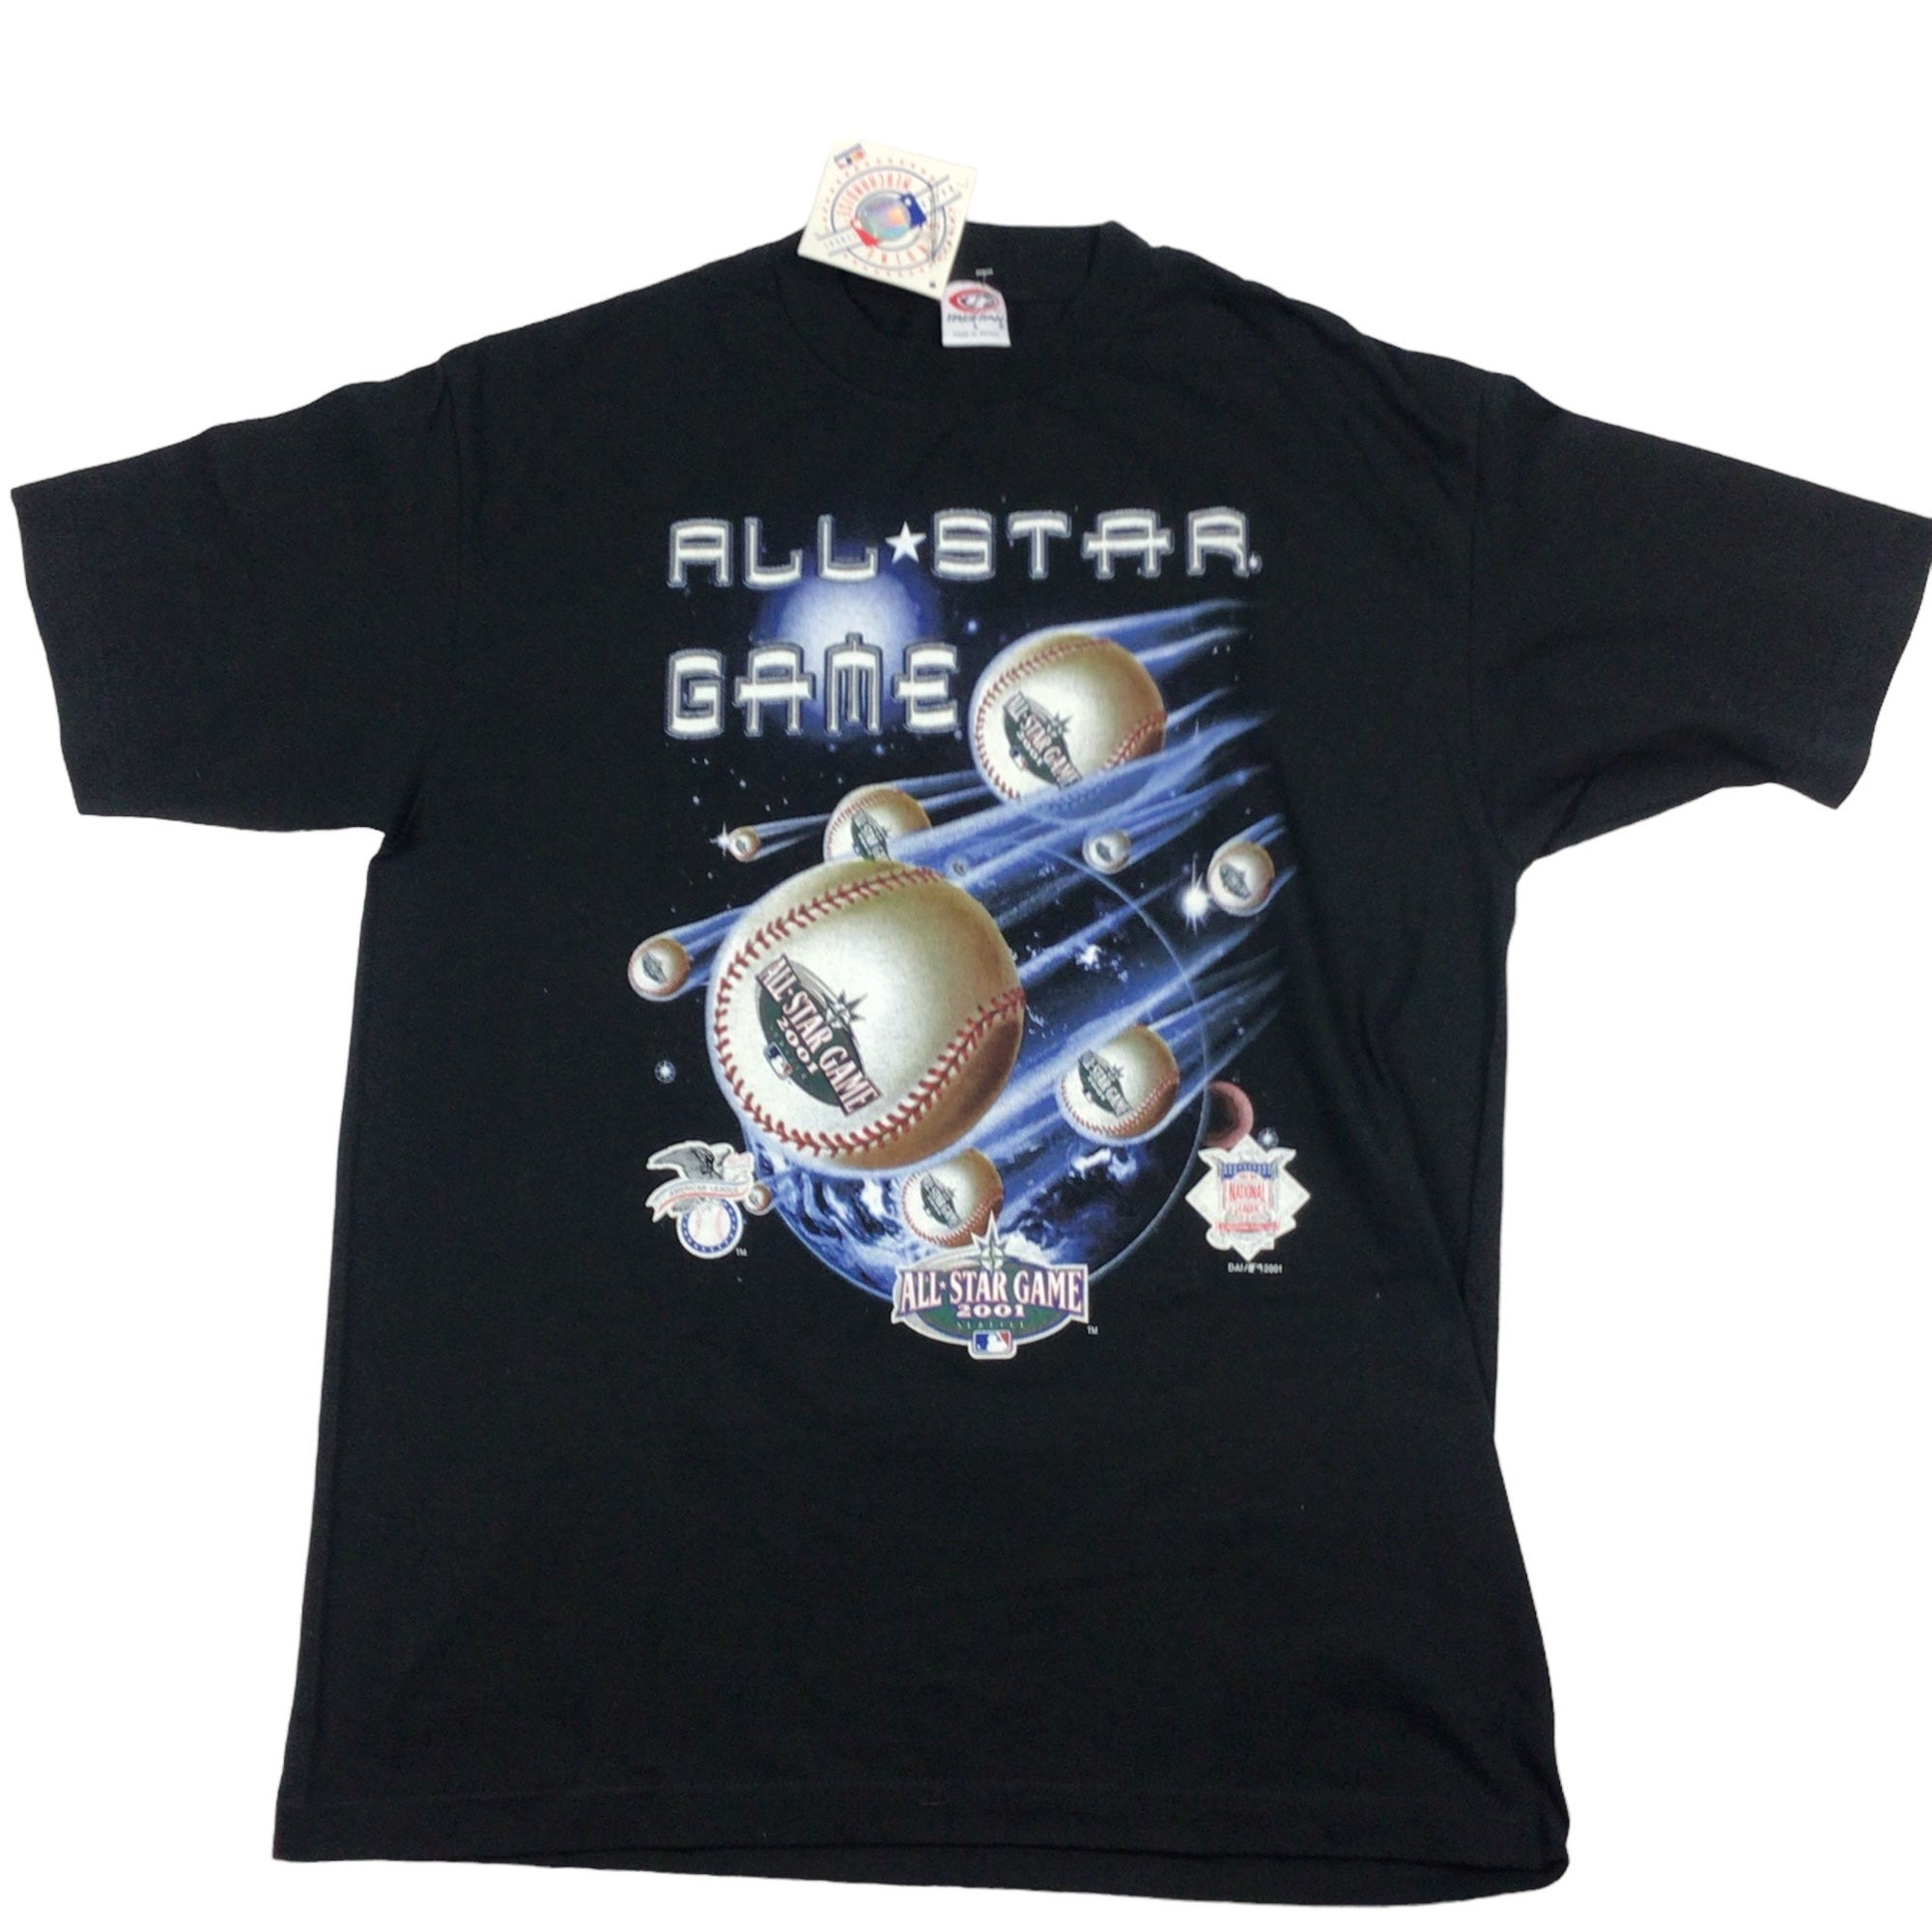 Seattle Mariners All Star Game 2001 logo shirt by To-Tee Clothing - Issuu